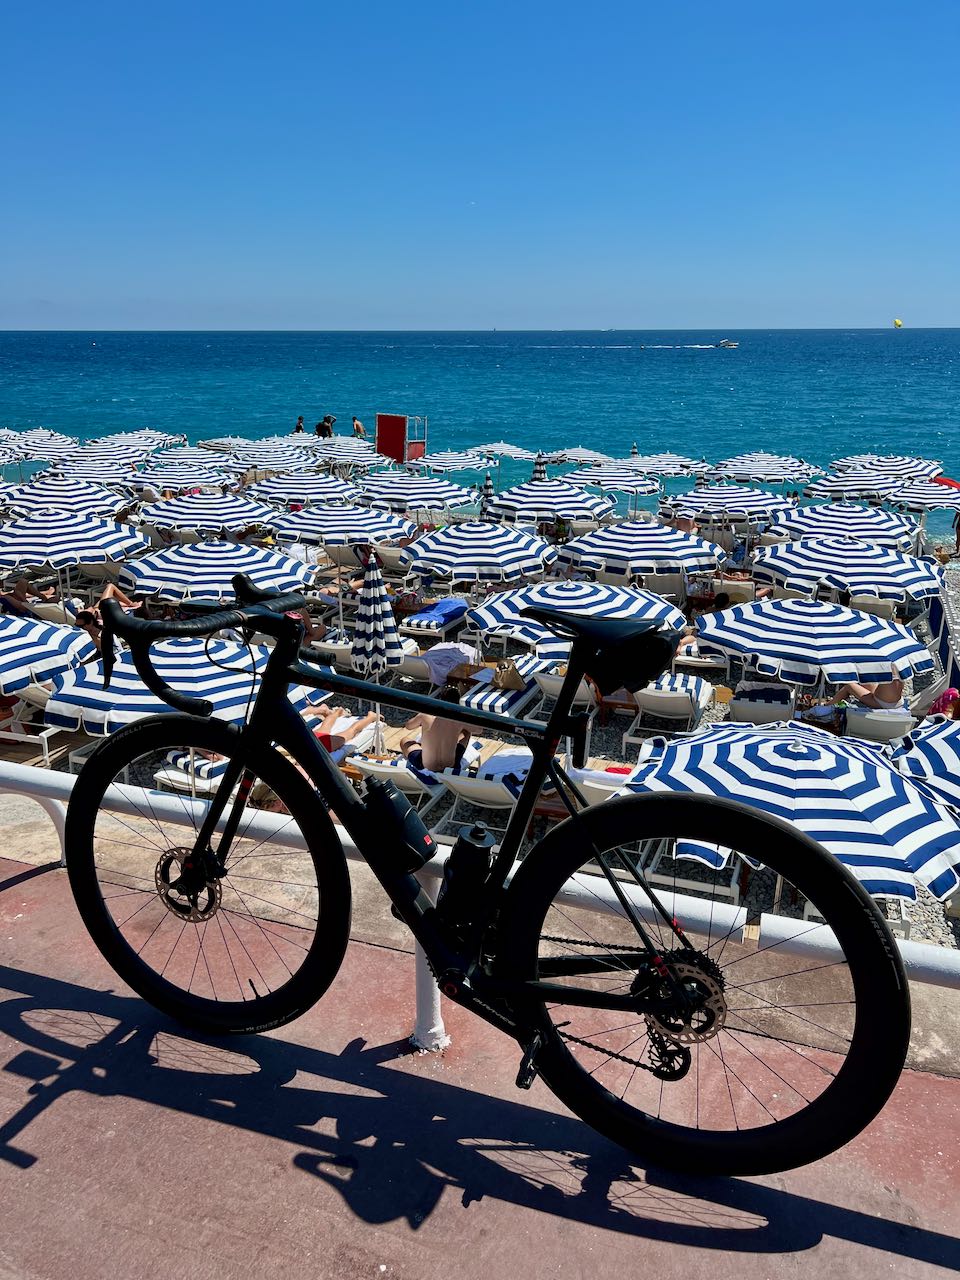 Road bicycle with blue umbrellas at the beach in Nice, France